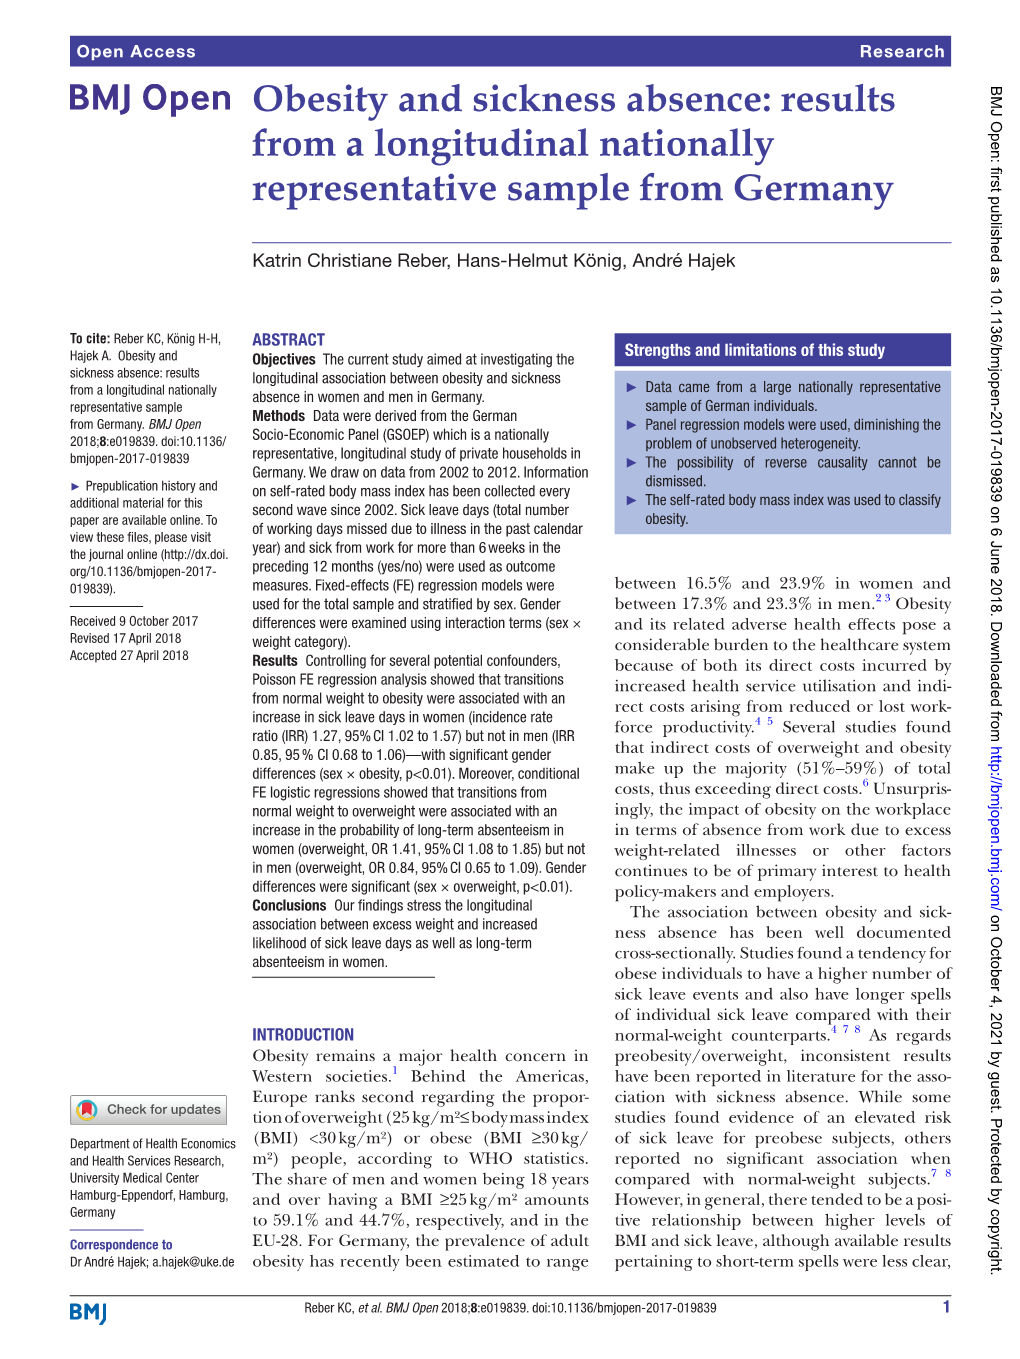 Obesity and Sickness Absence: Results from a Longitudinal Nationally Representative Sample from Germany